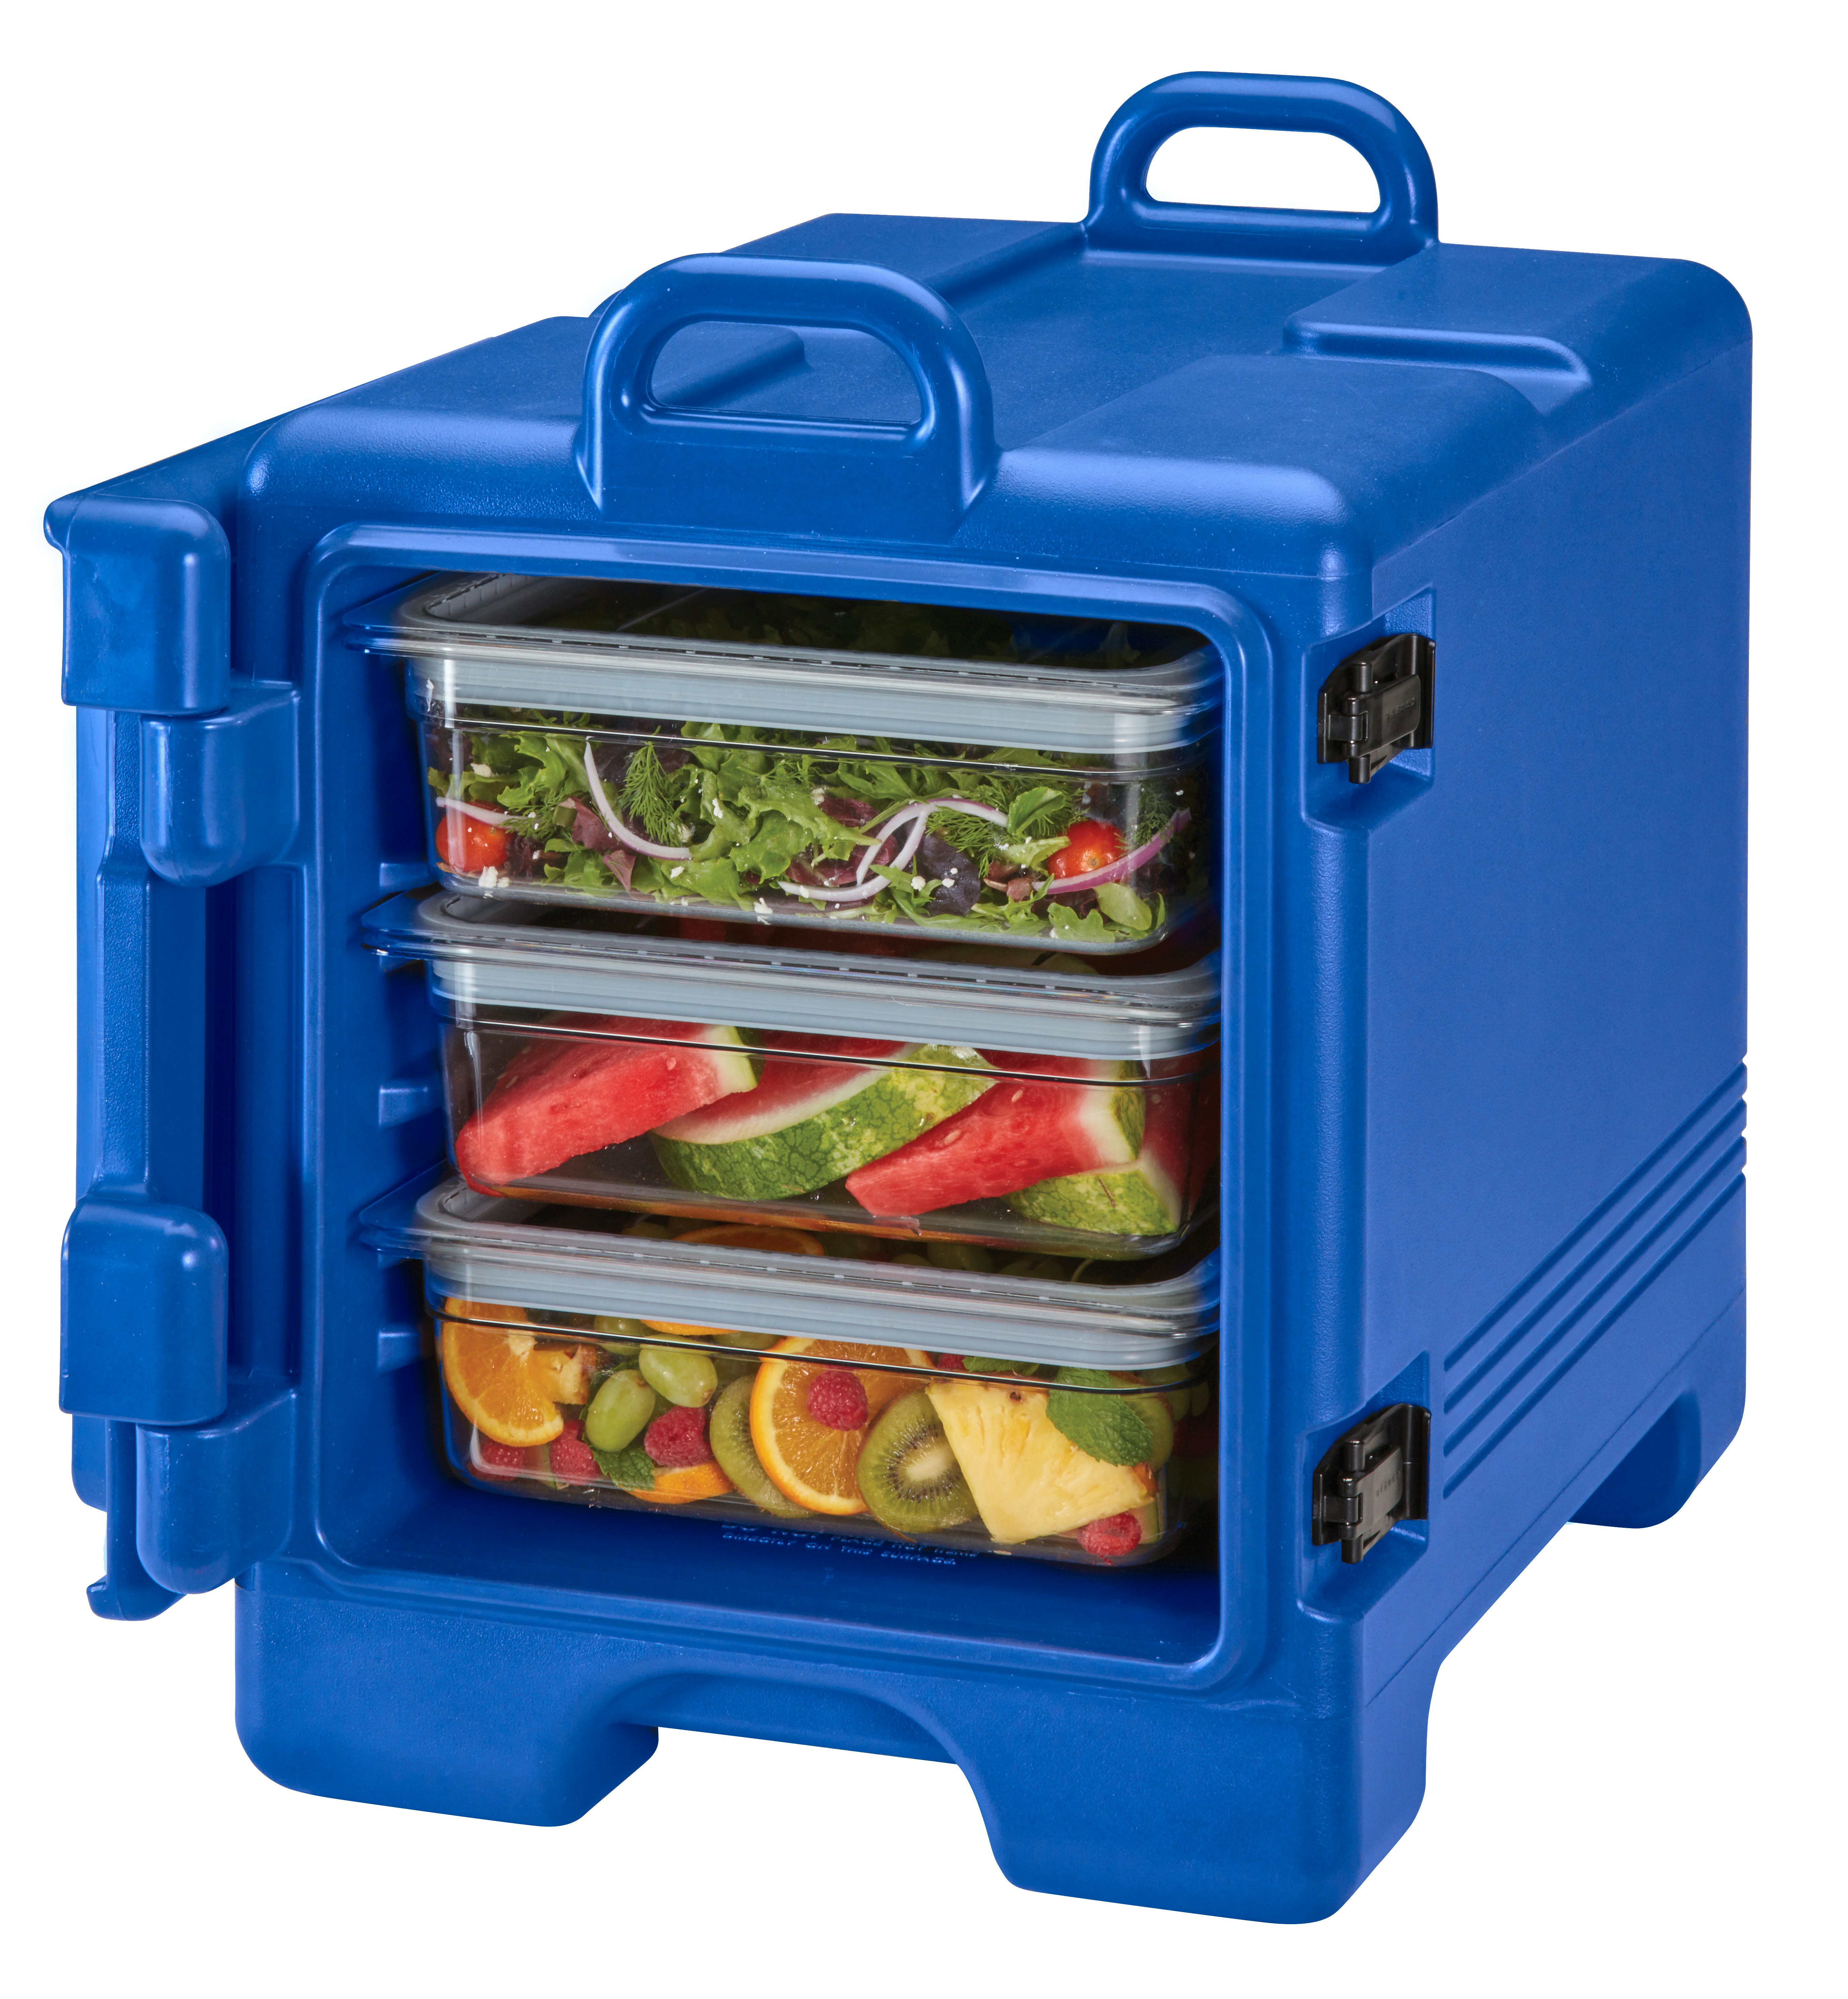 https://cambro-dam.imgix.net/PU0DO3EZ/as/pbev8h-9slha0-5qna7l/UPC300186_Navy_Blue_Front_Loader_Insulated_Carrier_w_Food_Pans.jpg?dl